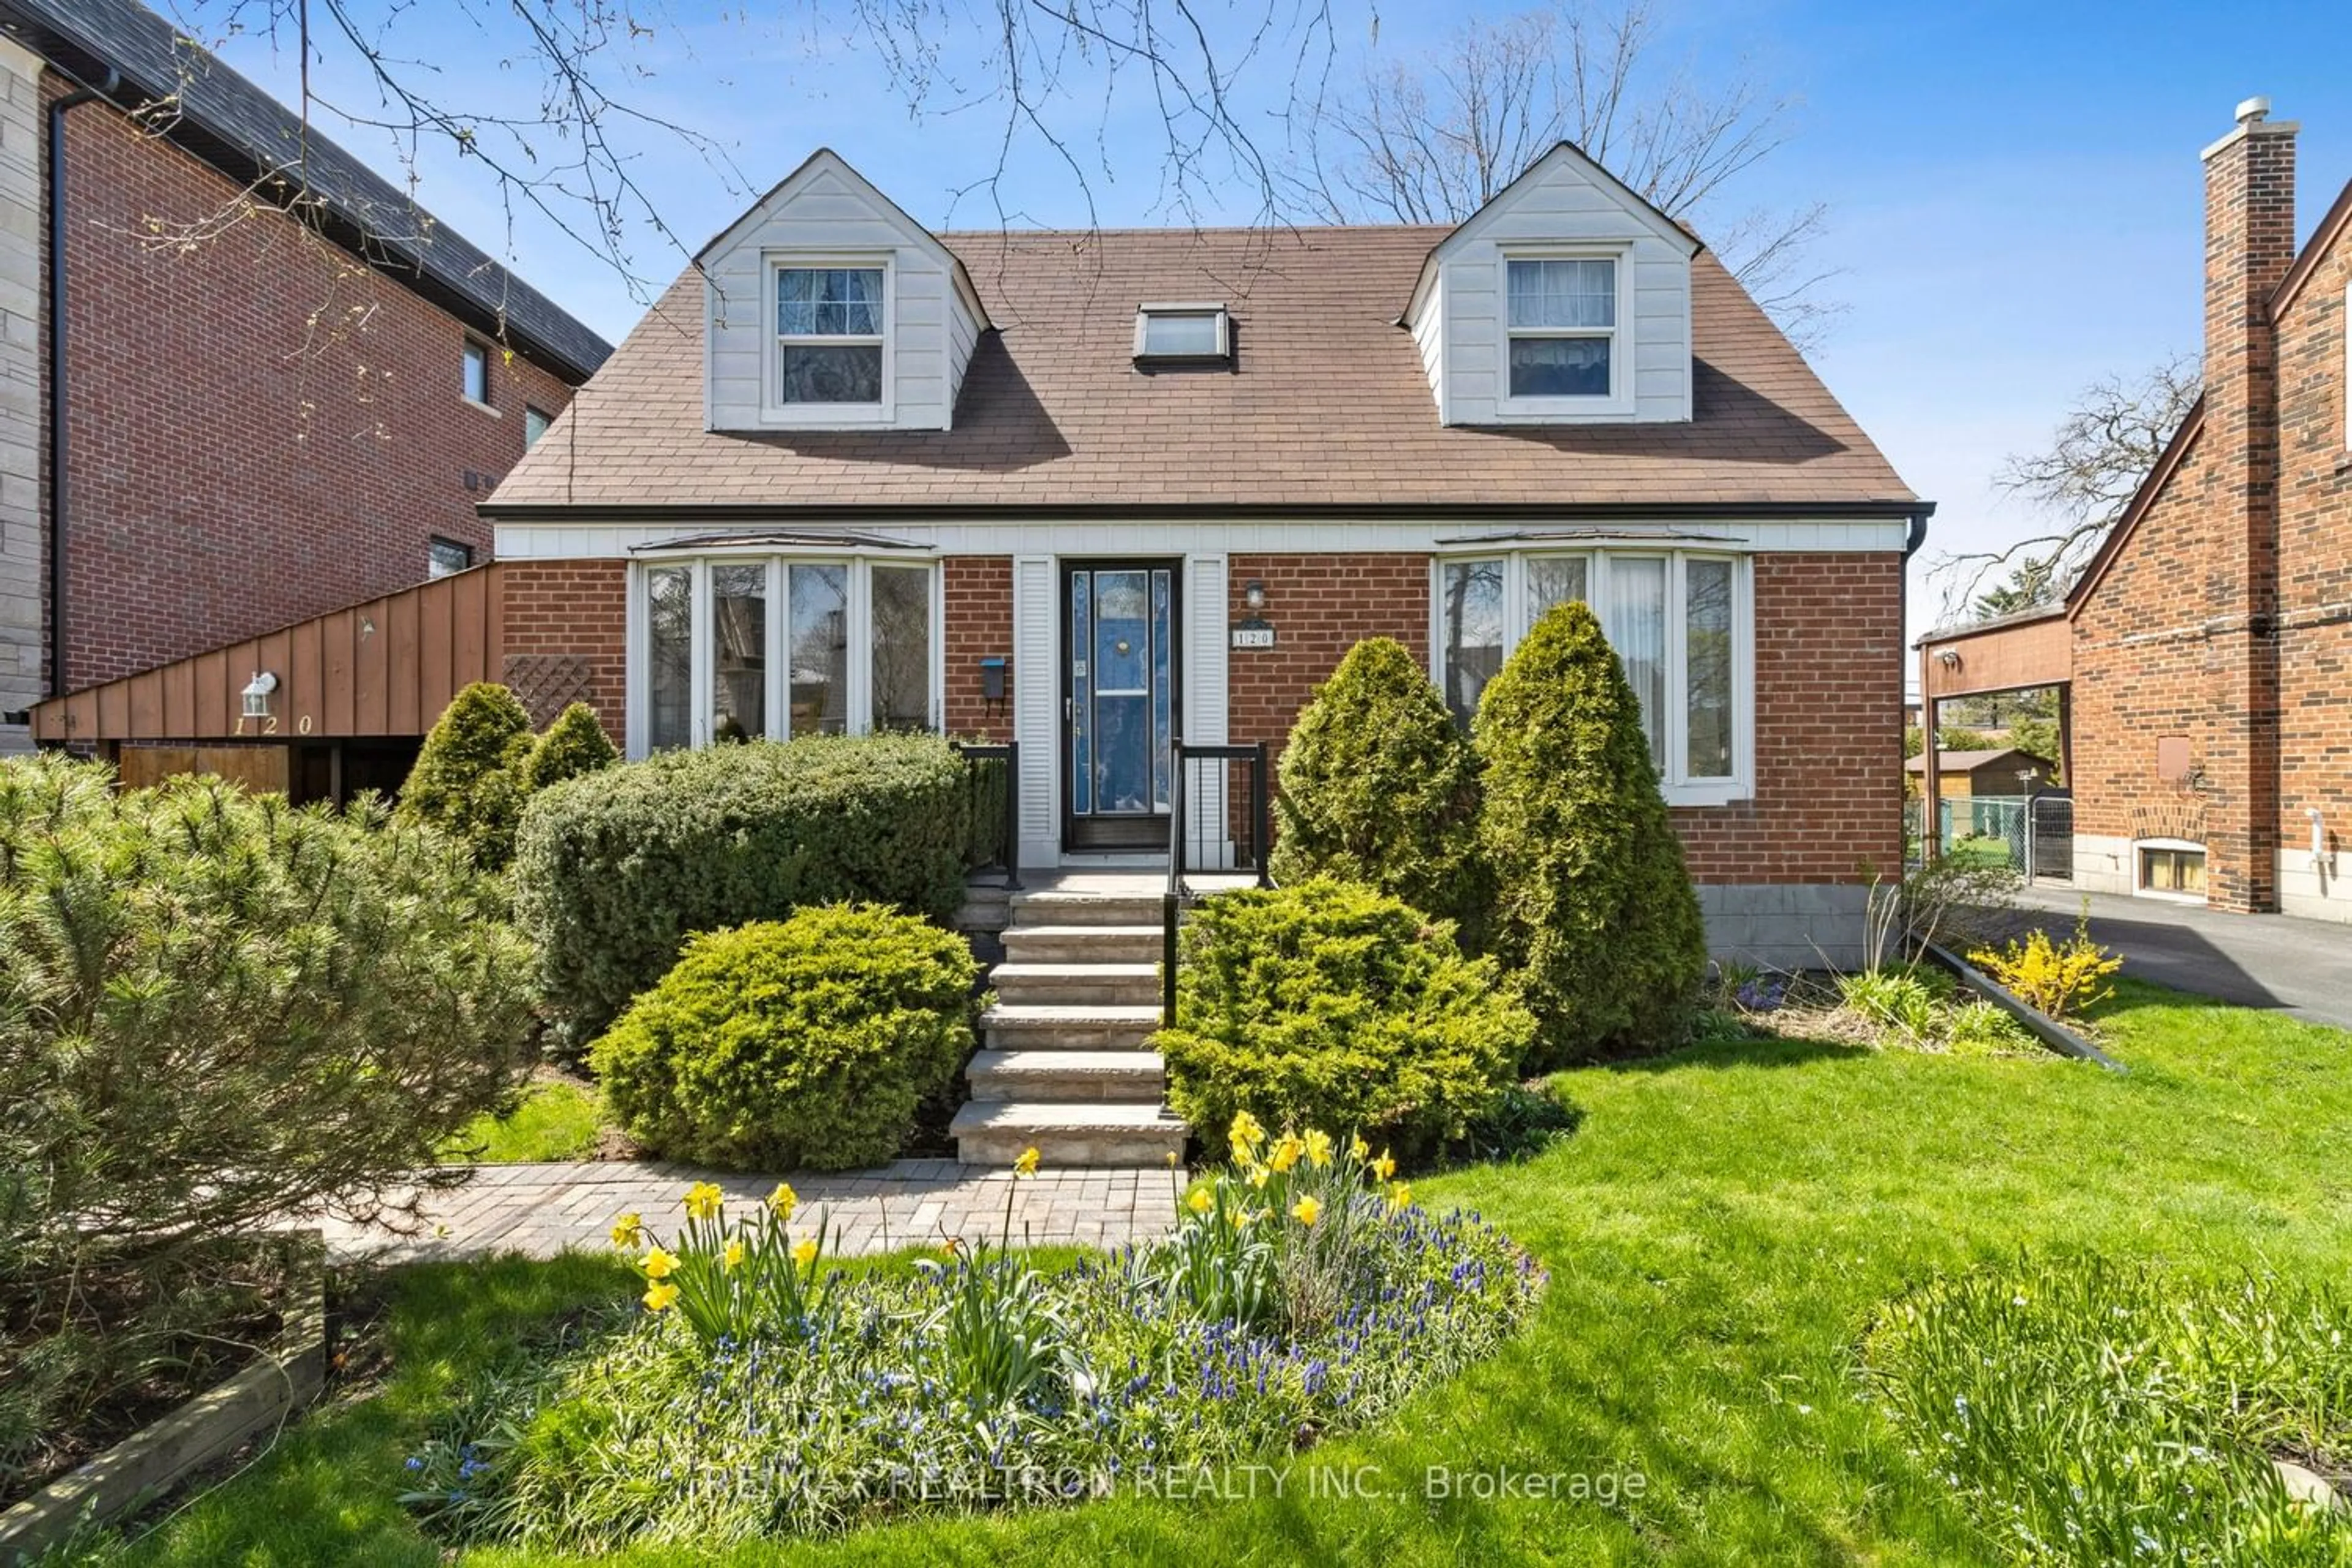 Home with brick exterior material for 120 Bevdale Rd, Toronto Ontario M2R 1L7